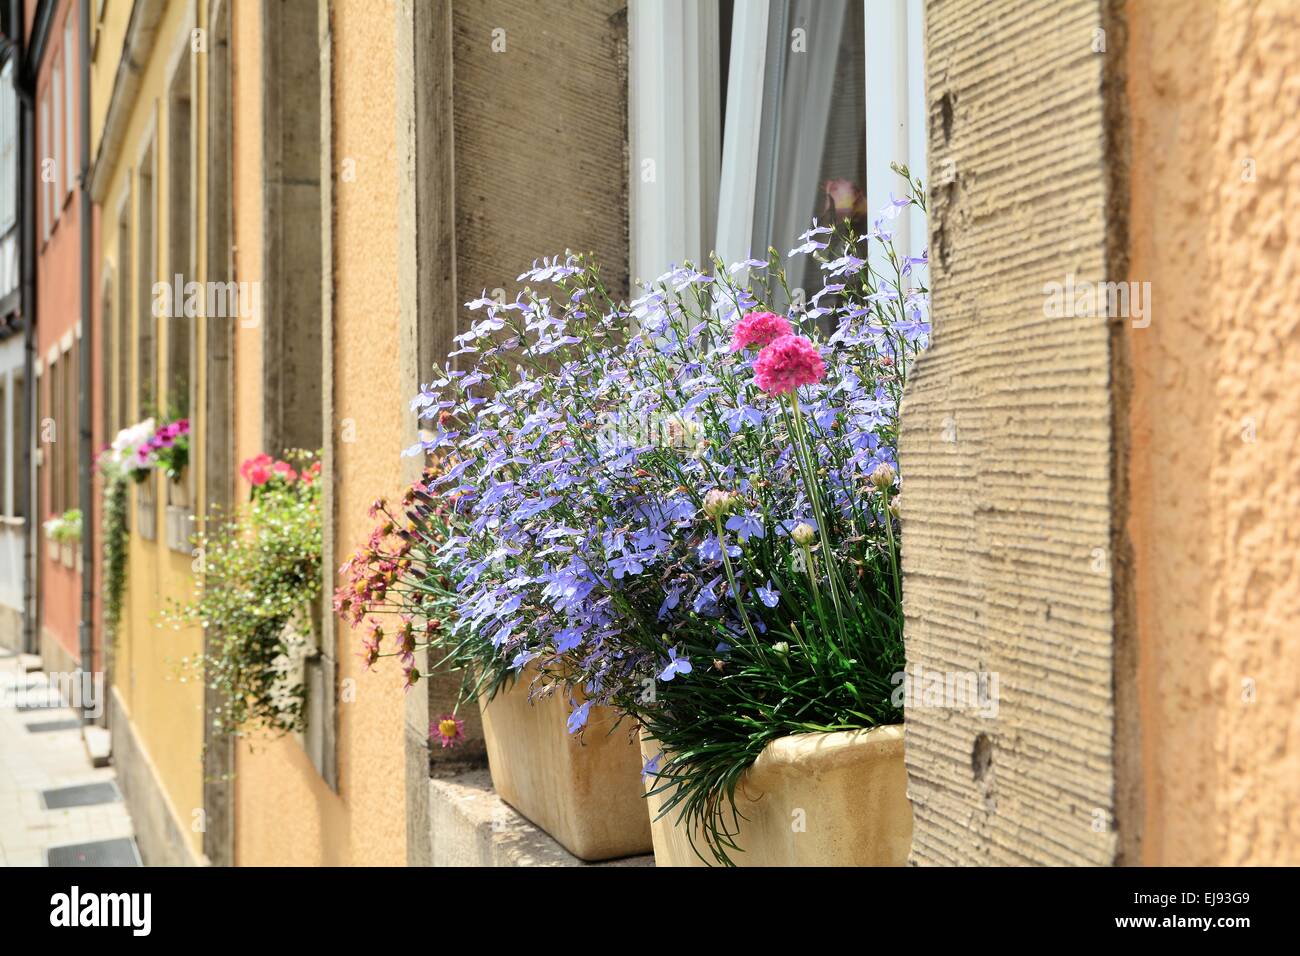 Flowers in the window of a house Stock Photo